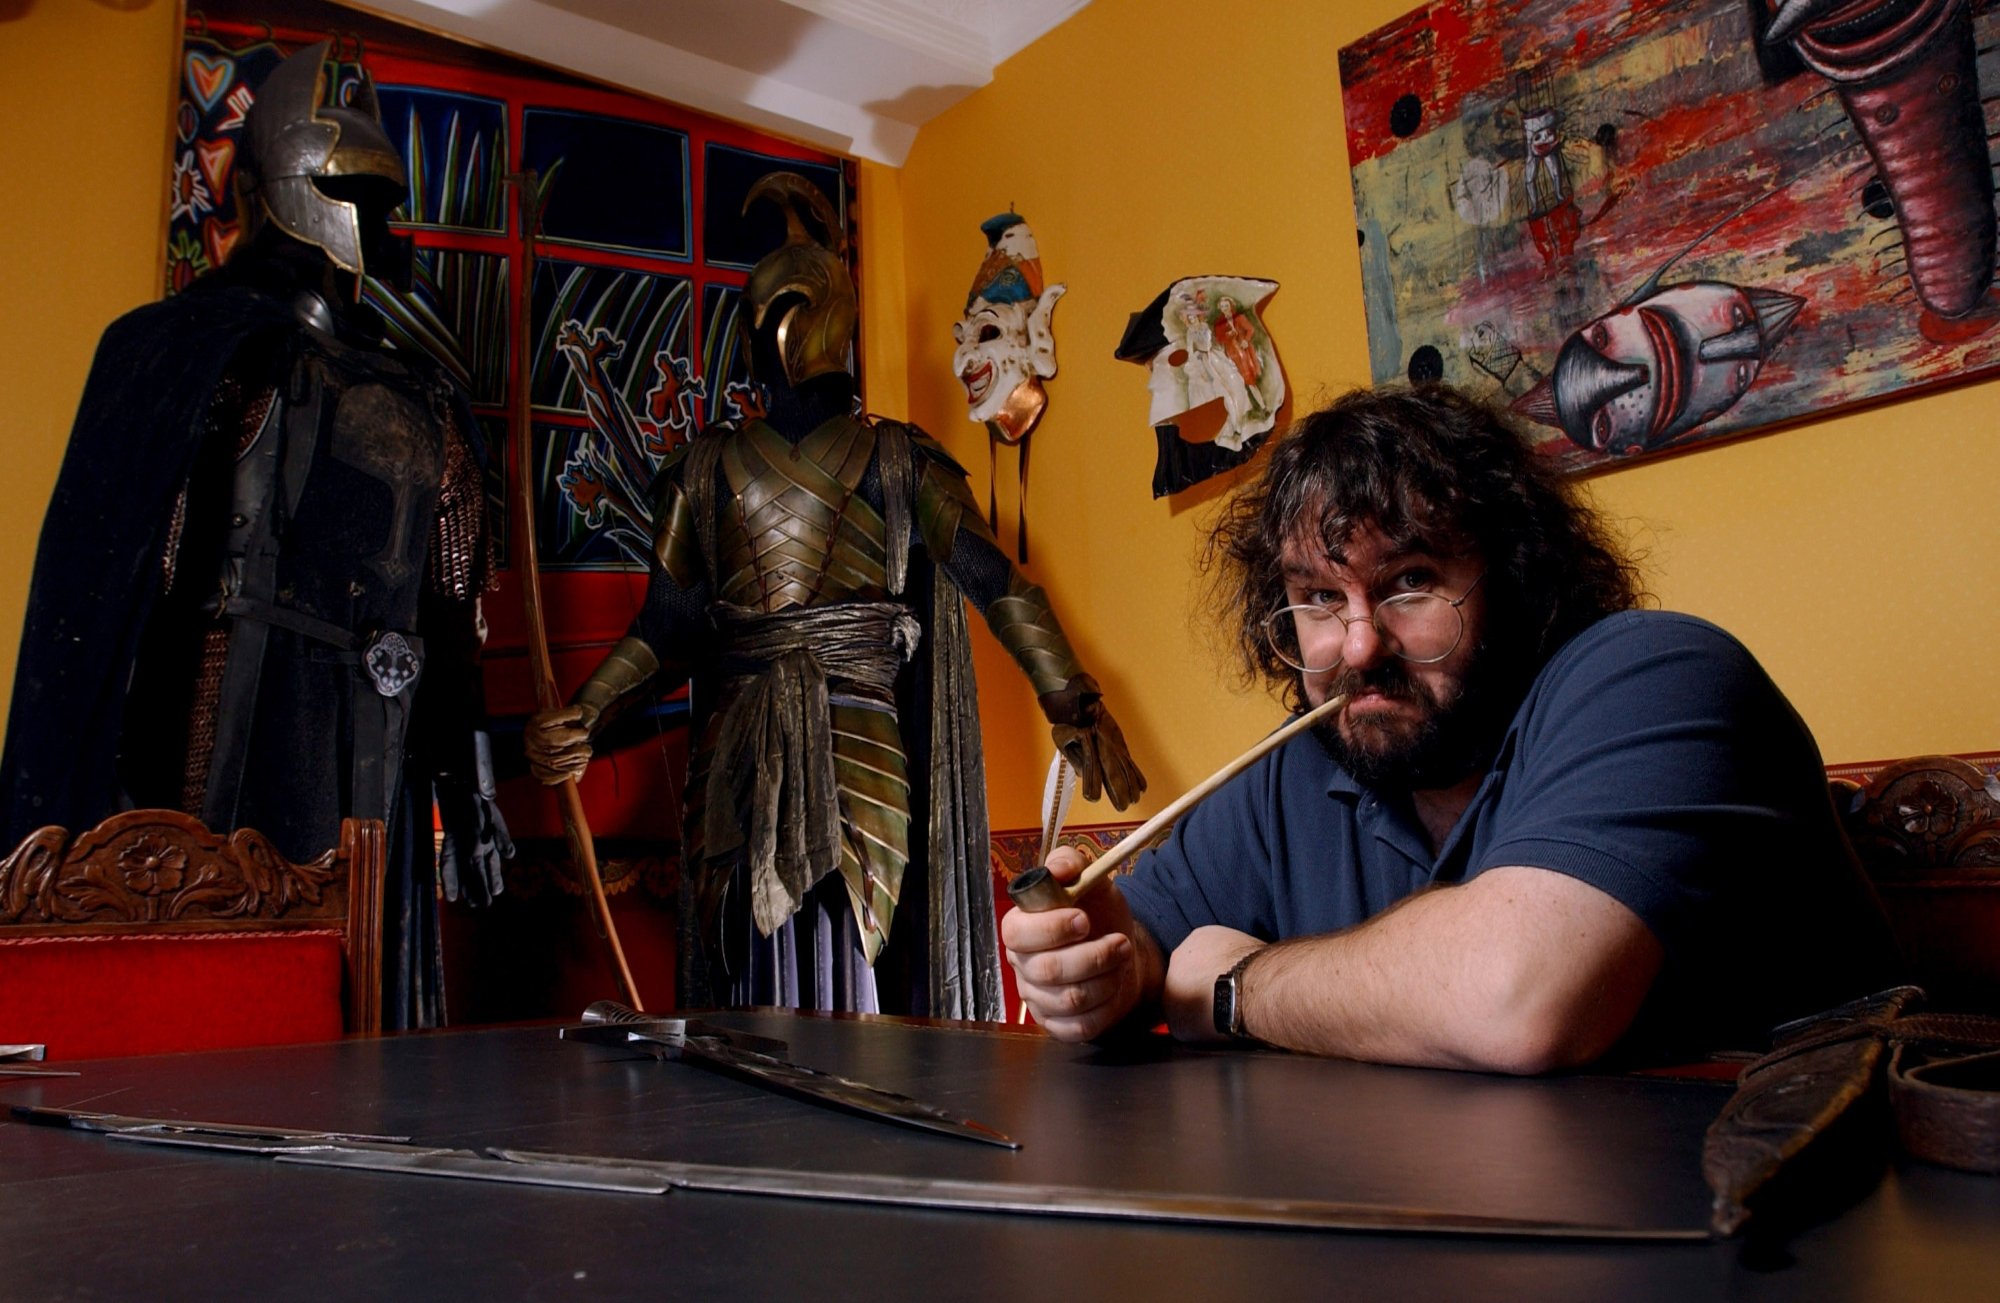 Peter Jackson posing with 'The Lord of the Rings' props with a pipe in his mouth. He's wearing a blue shirt and glasses with his arms resting on the table.